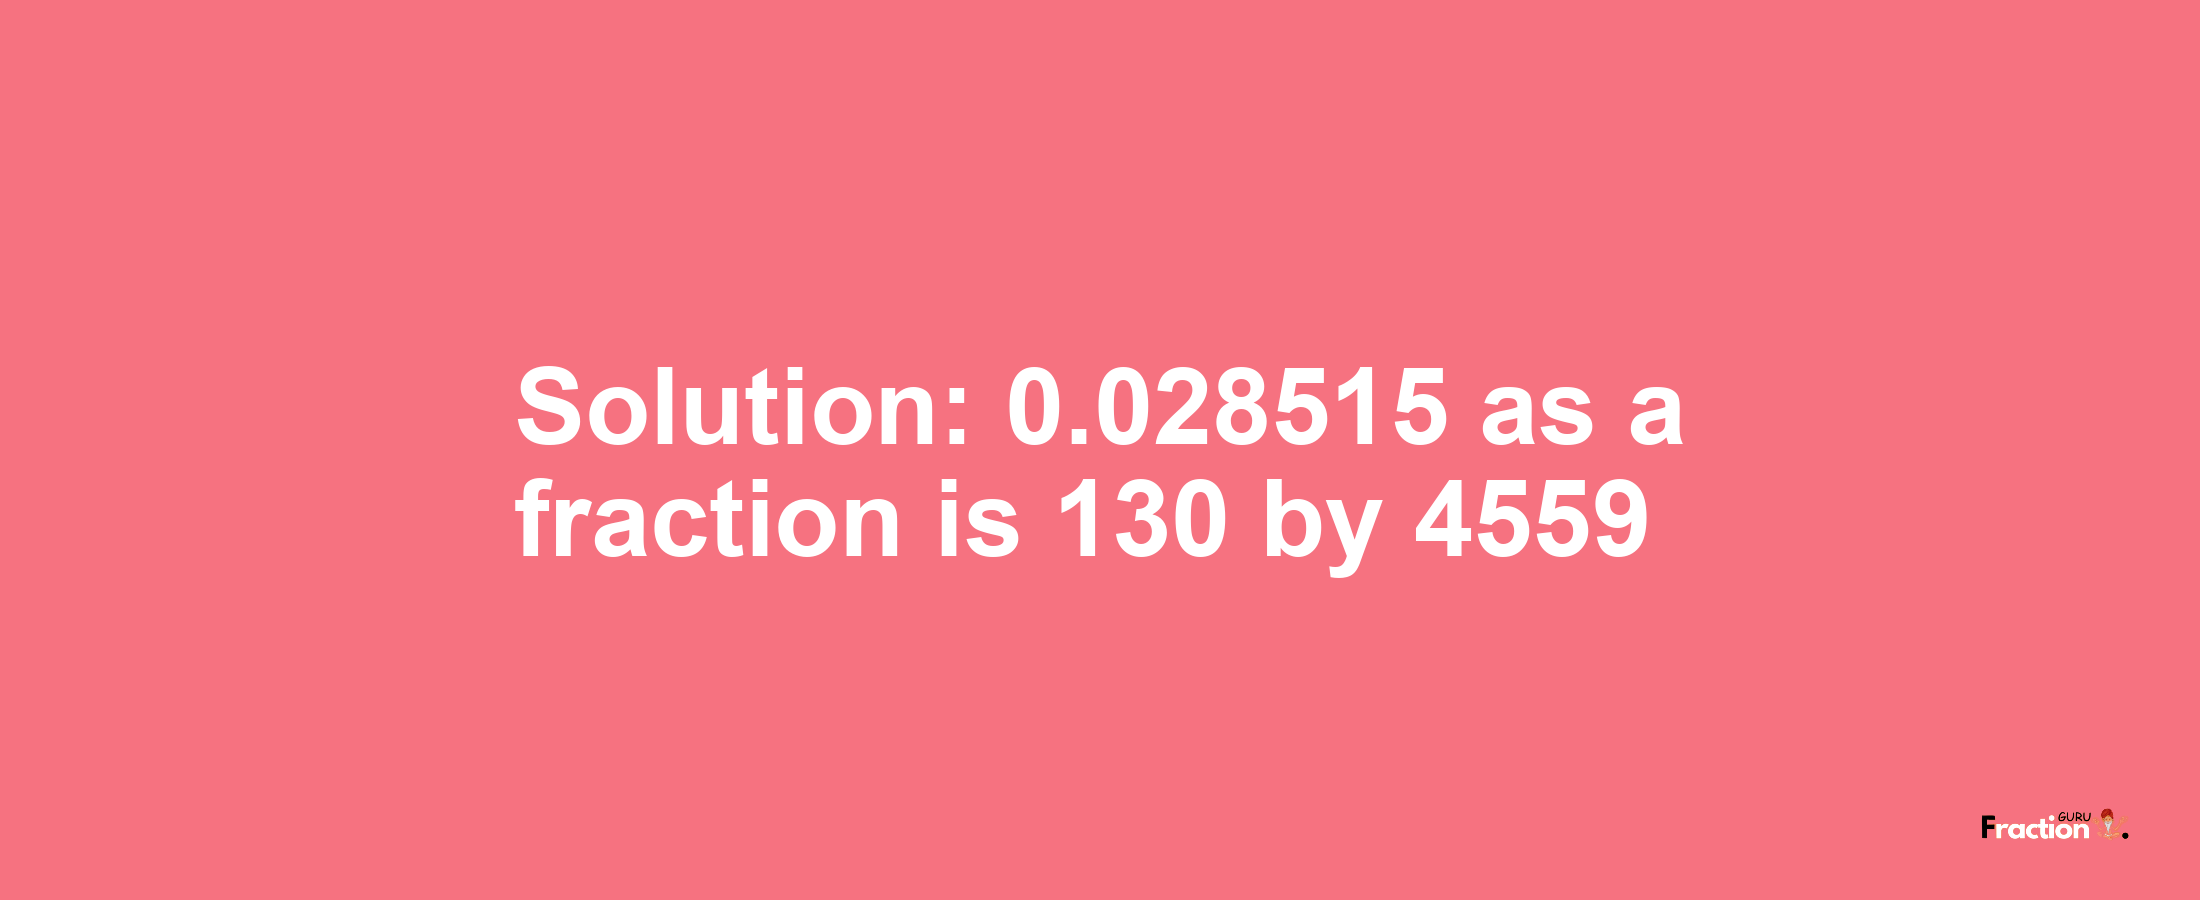 Solution:0.028515 as a fraction is 130/4559